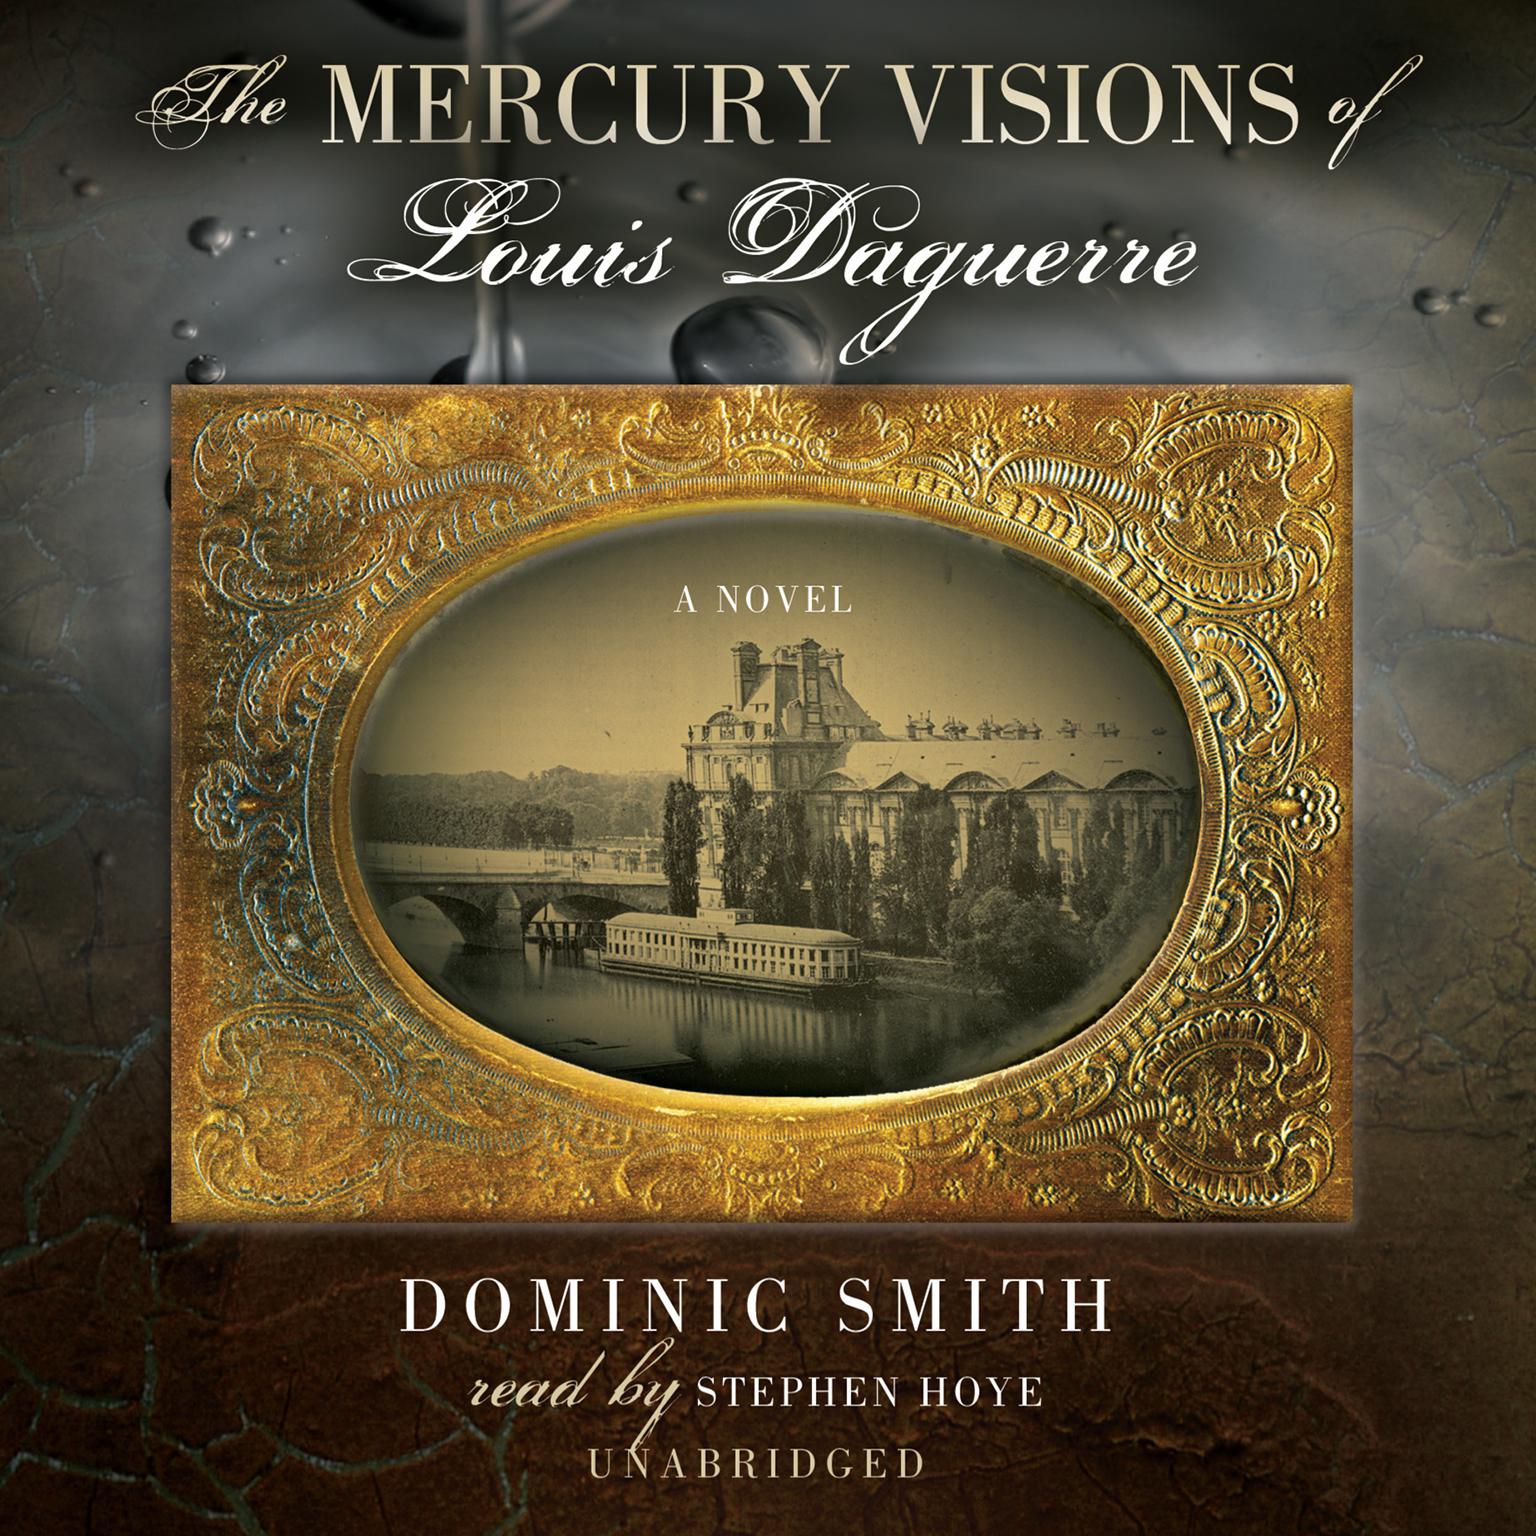 The Mercury Visions of Louis Daguerre: A Novel Audiobook, by Dominic Smith